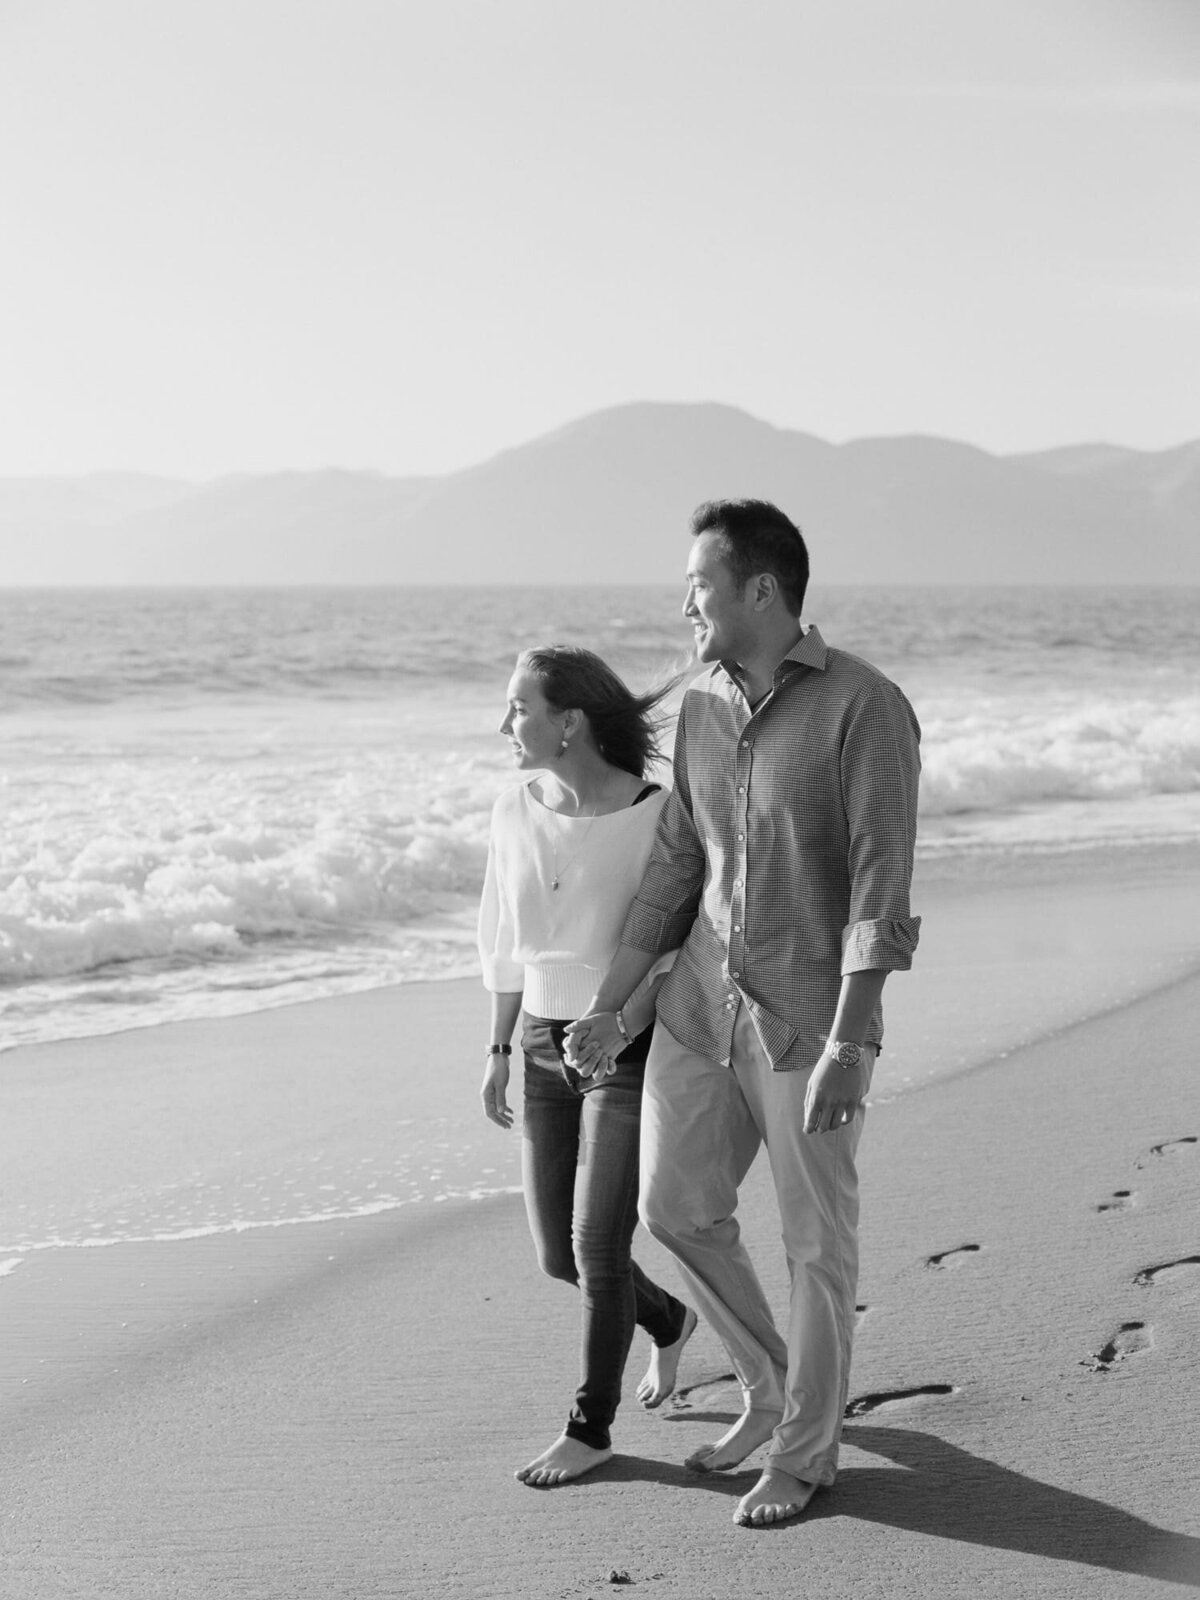 Asian man walks on the beach with his beloved partner.